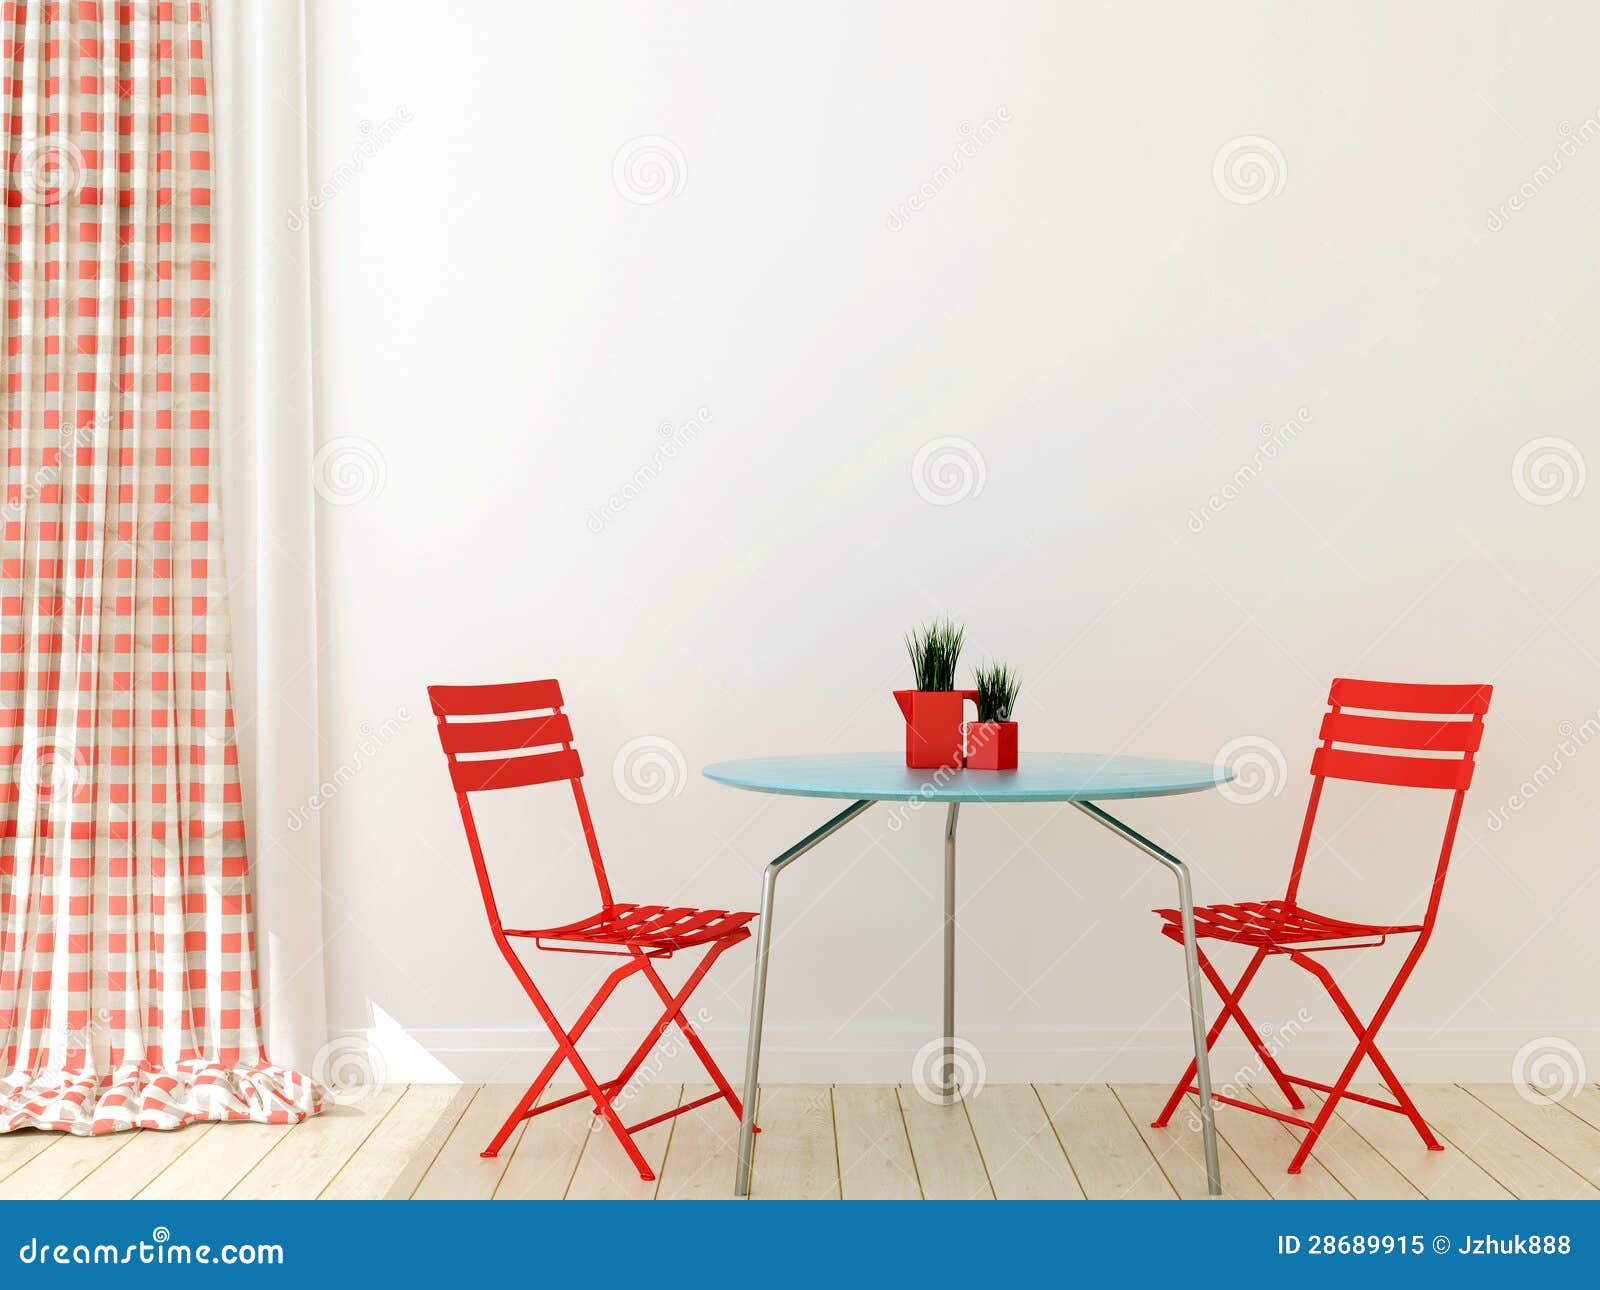 table with two red chairs